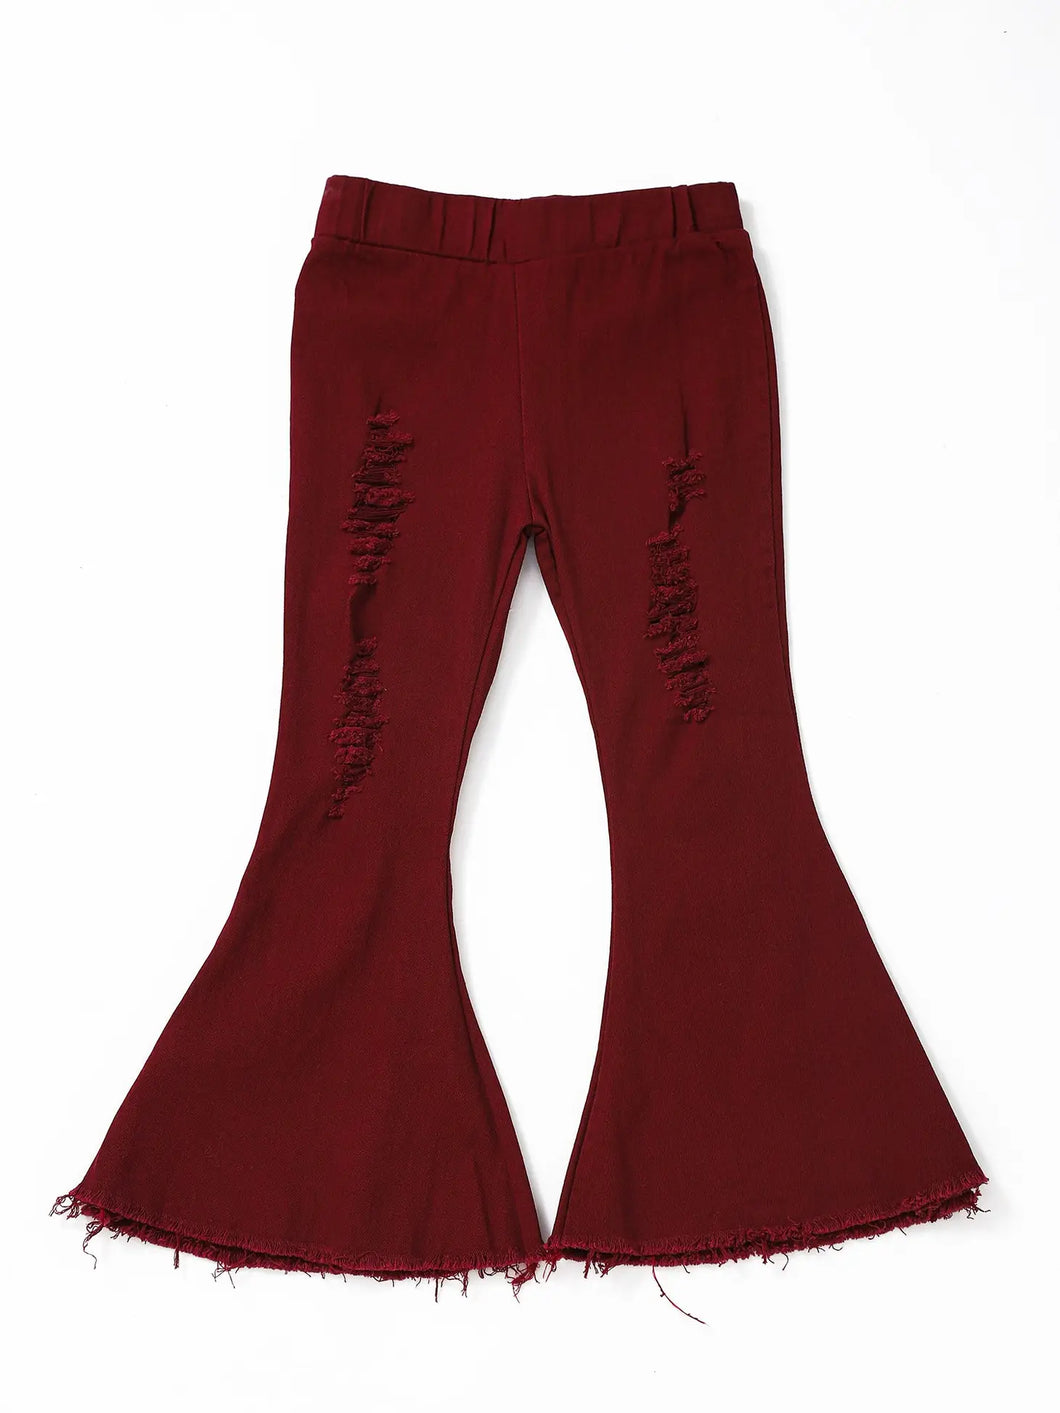 Distressed Maroon Toddler Flares